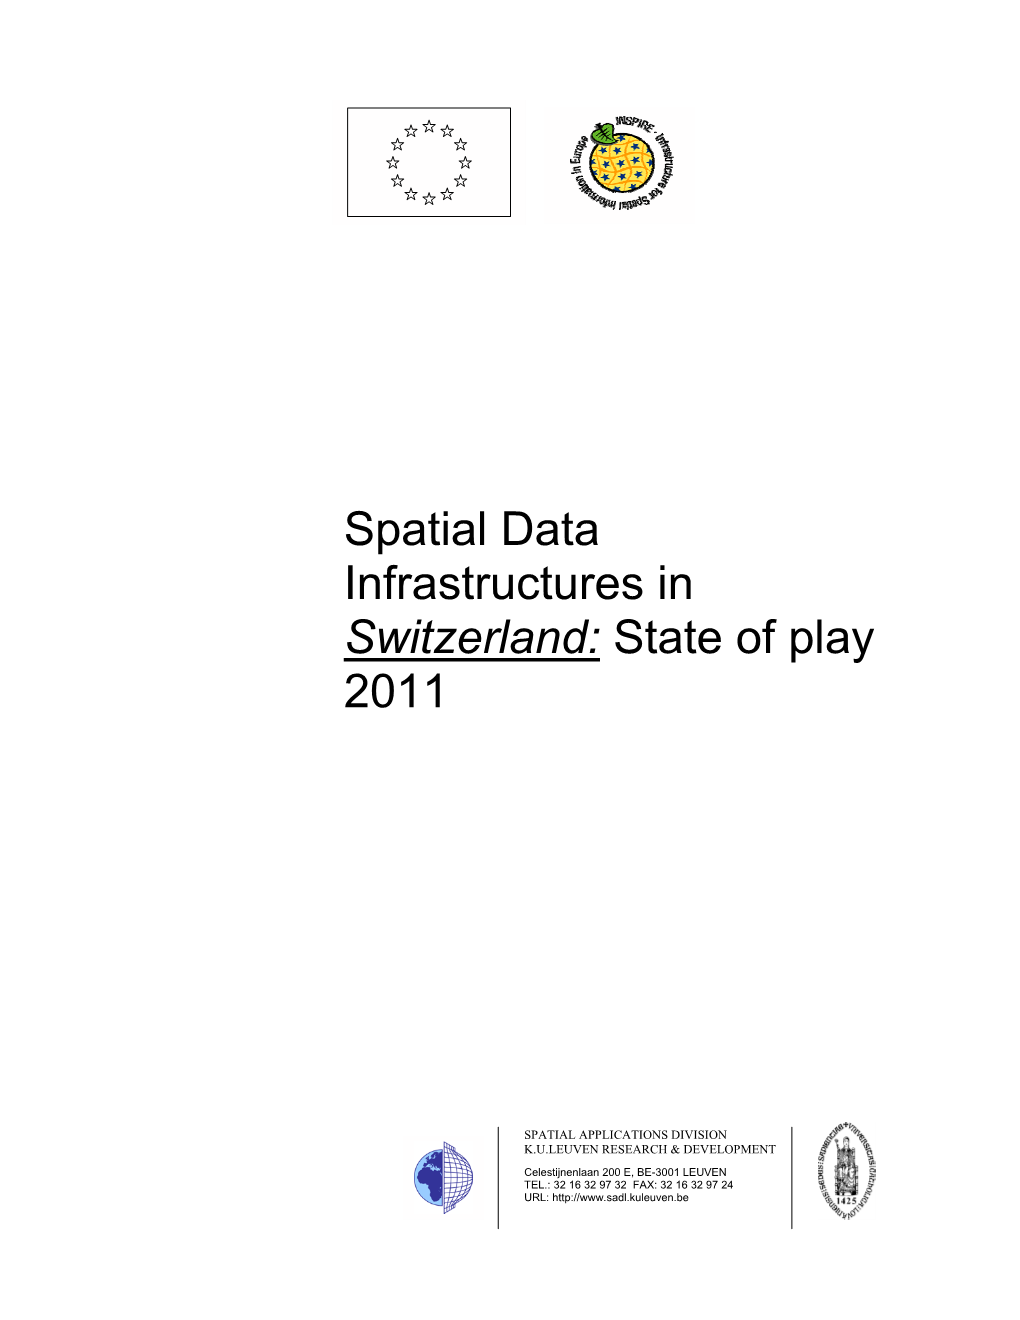 Spatial Data Infrastructures in Switzerland: State of Play 2011